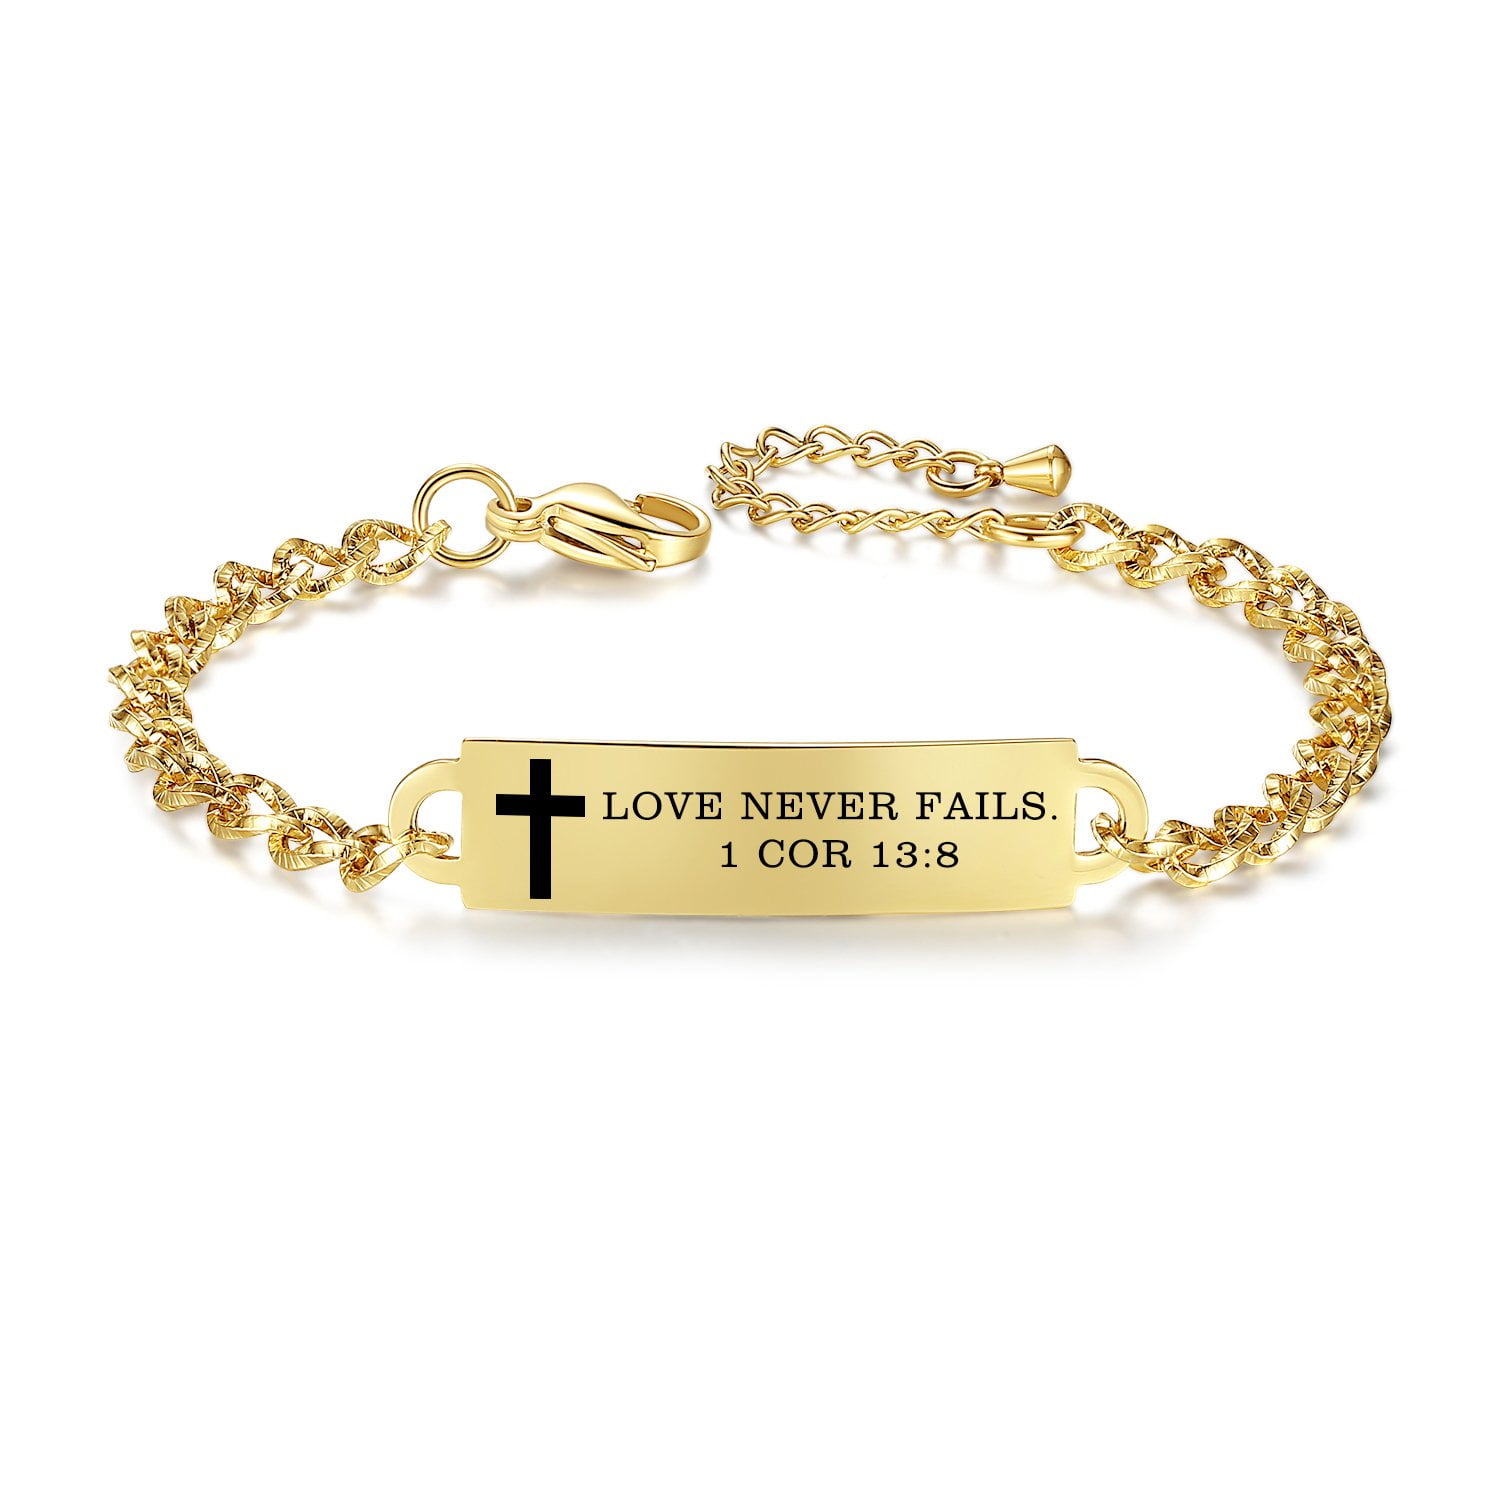 Wholesale Christian Bracelet | Faith Based Jewelry | Bible Verse Beads for  your store - Faire